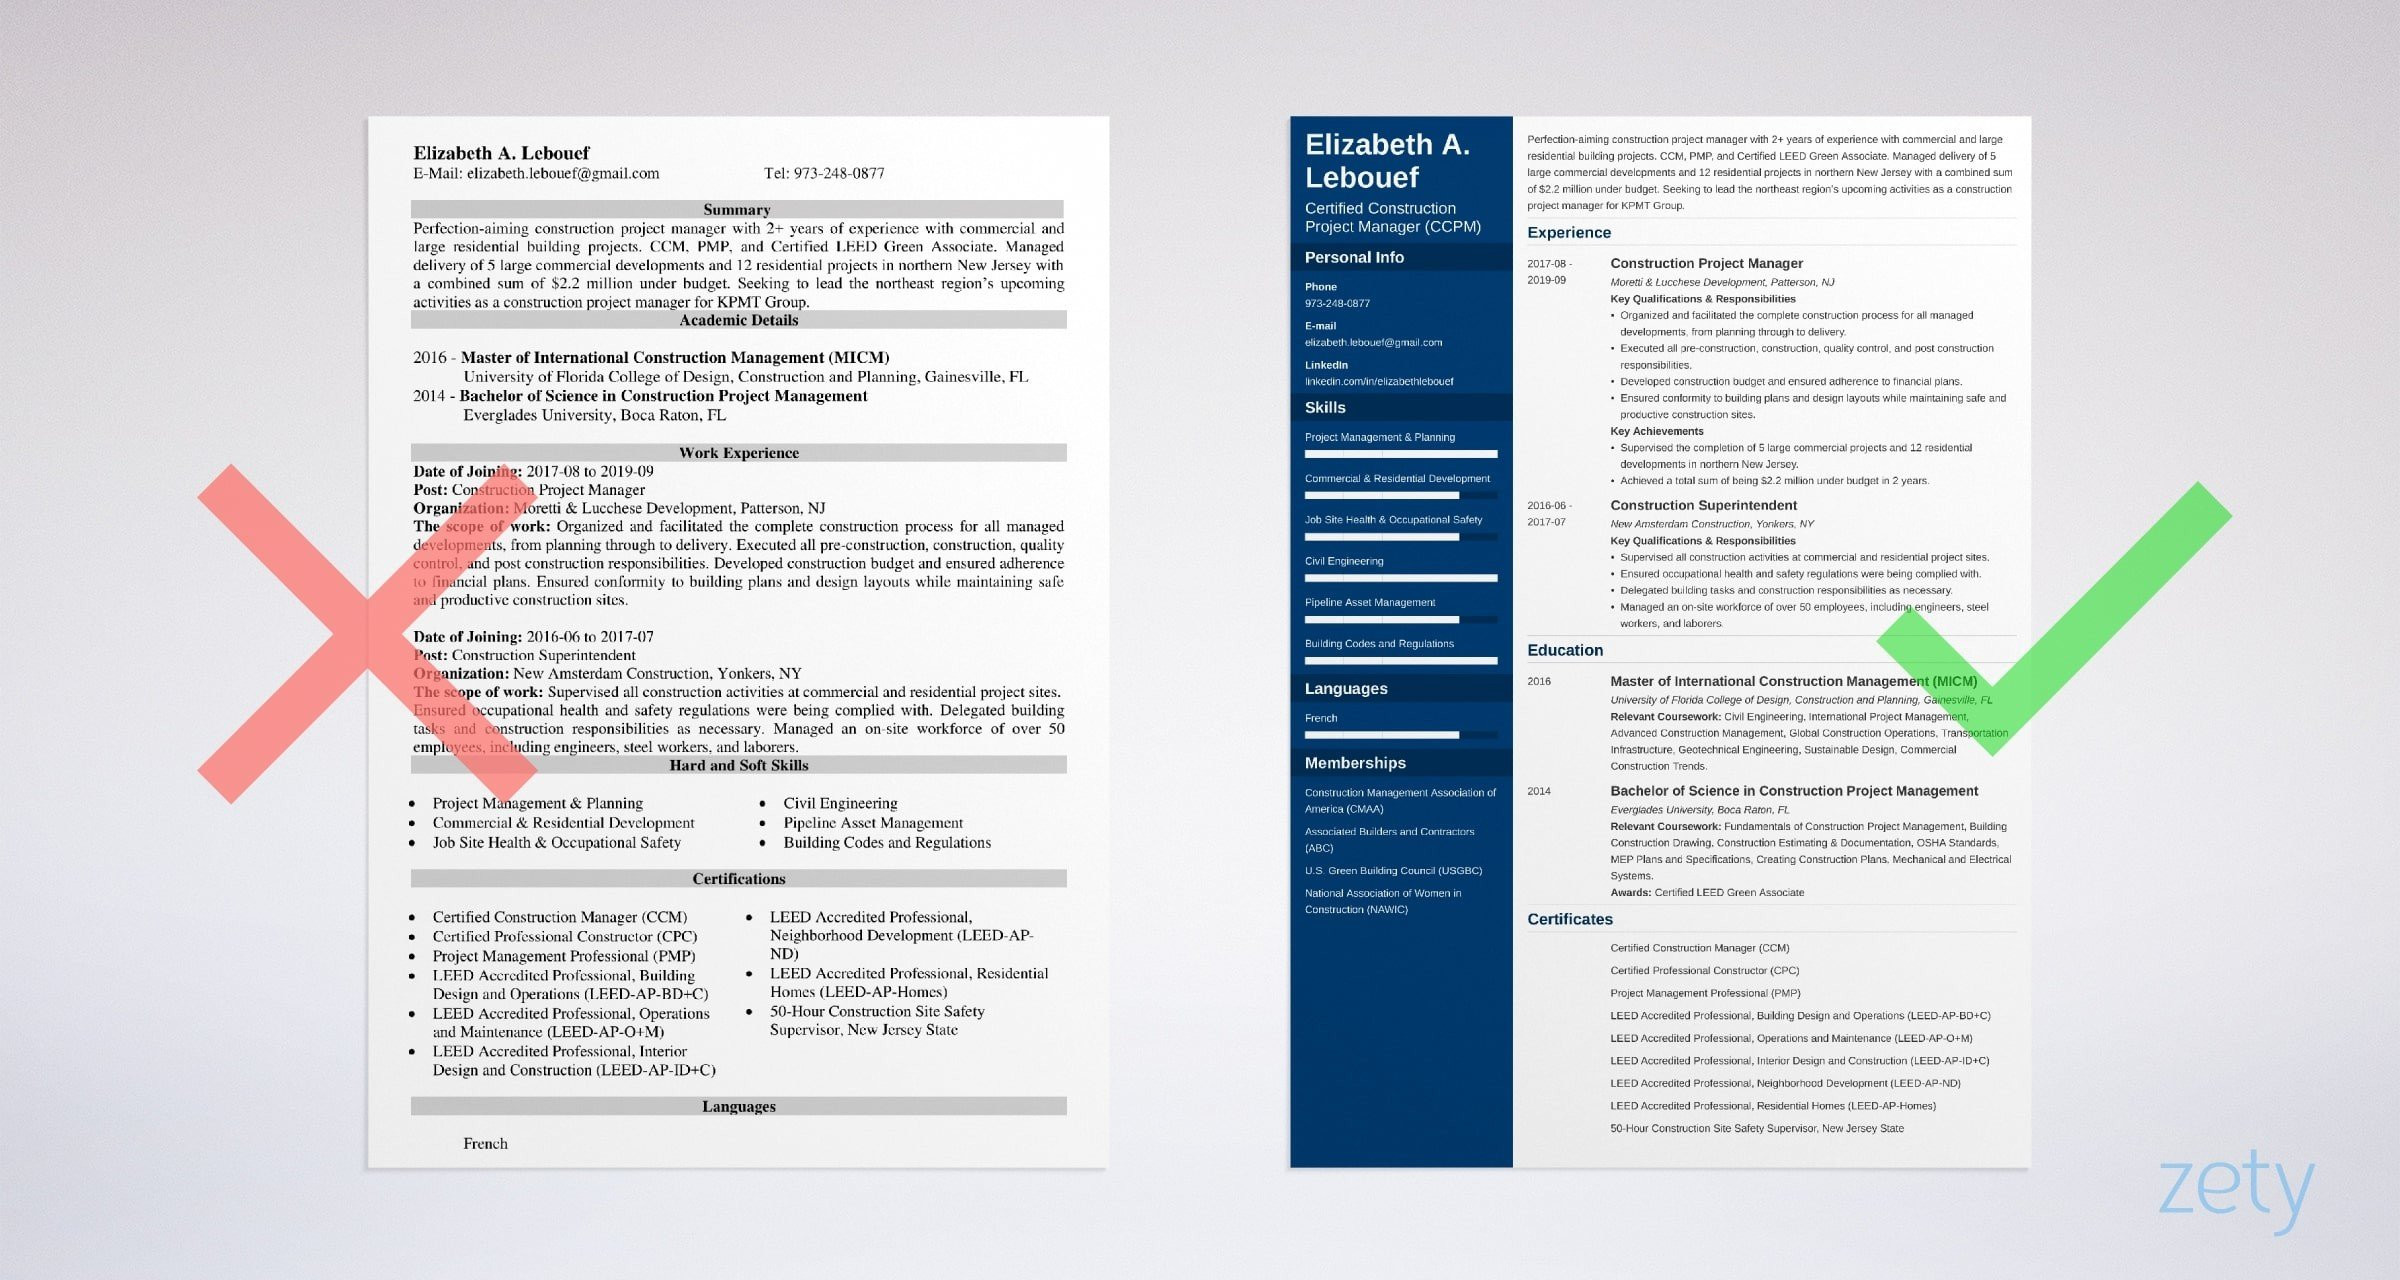 Free Sample Resume for Construction Project Manager Construction Project Manager Resume Examples & Guide